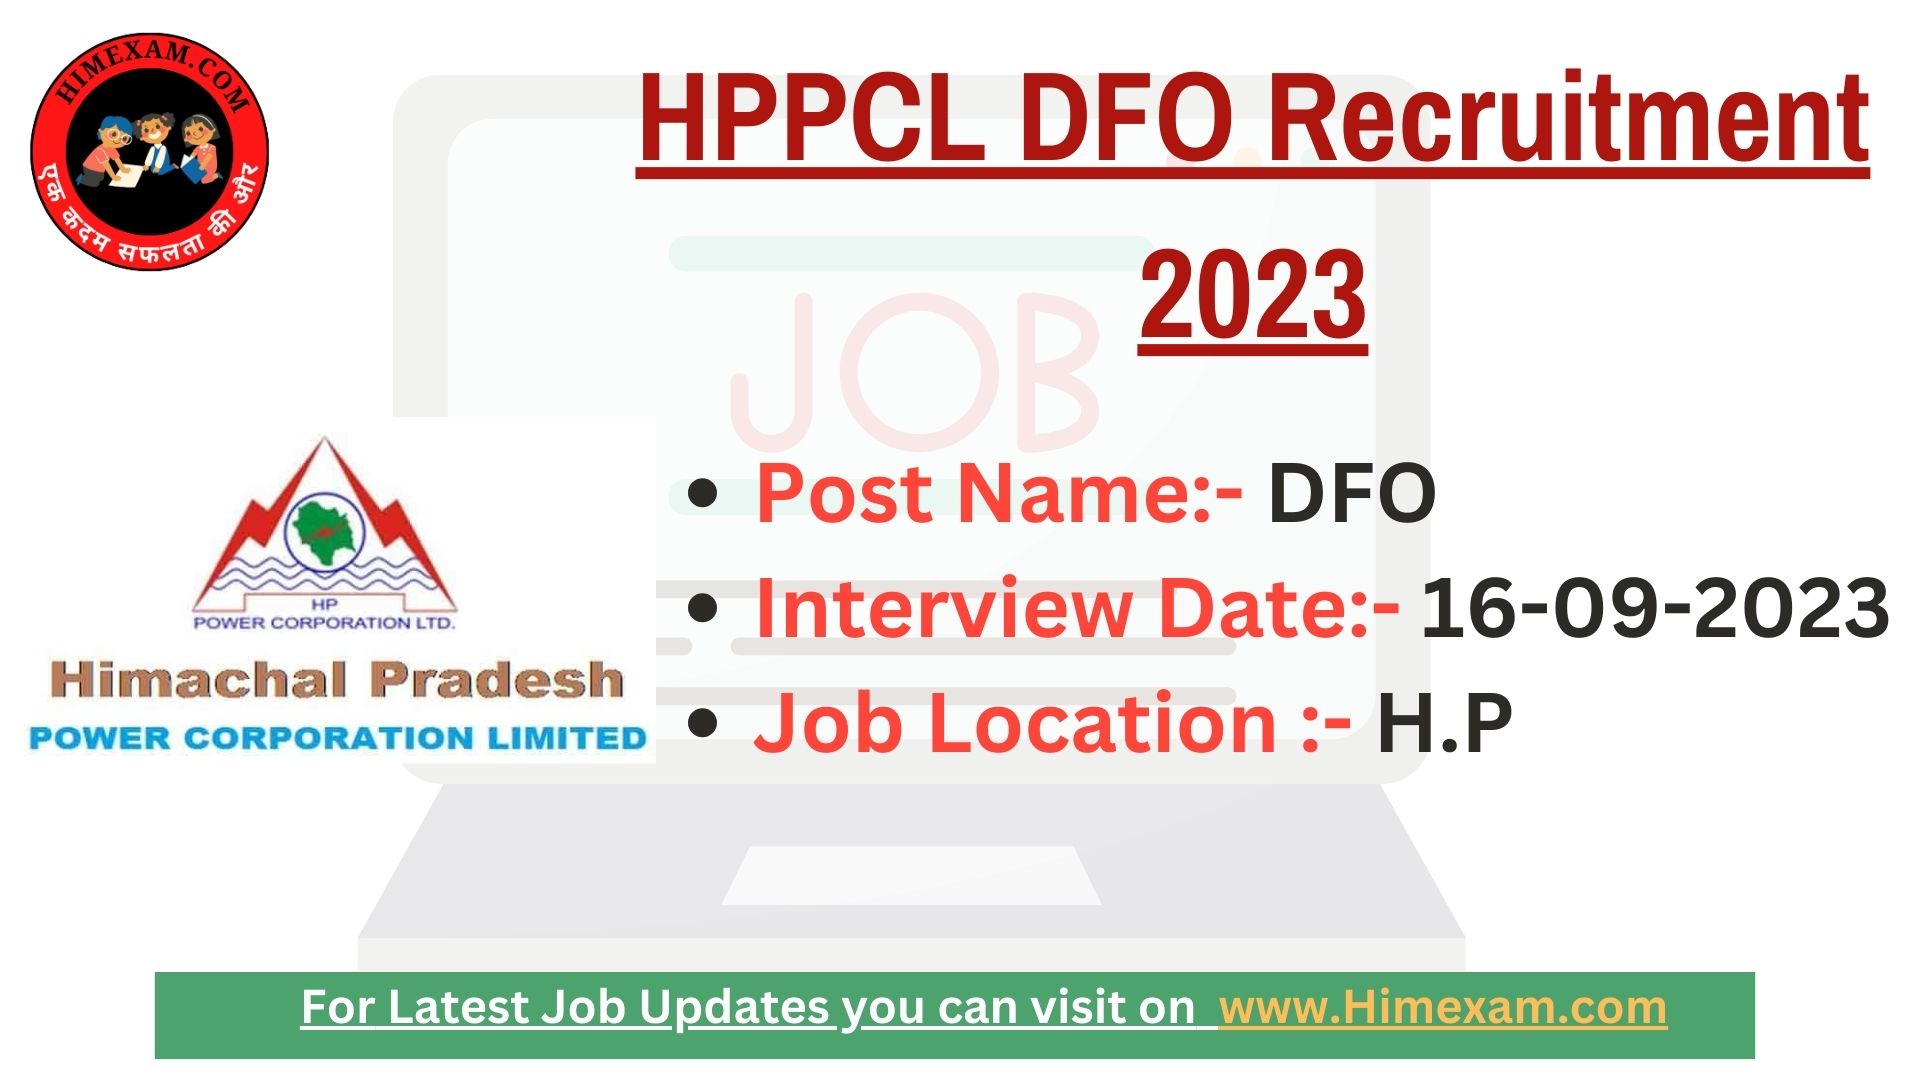 HPPCL DFO Recruitment 2023 Notification & Application Form